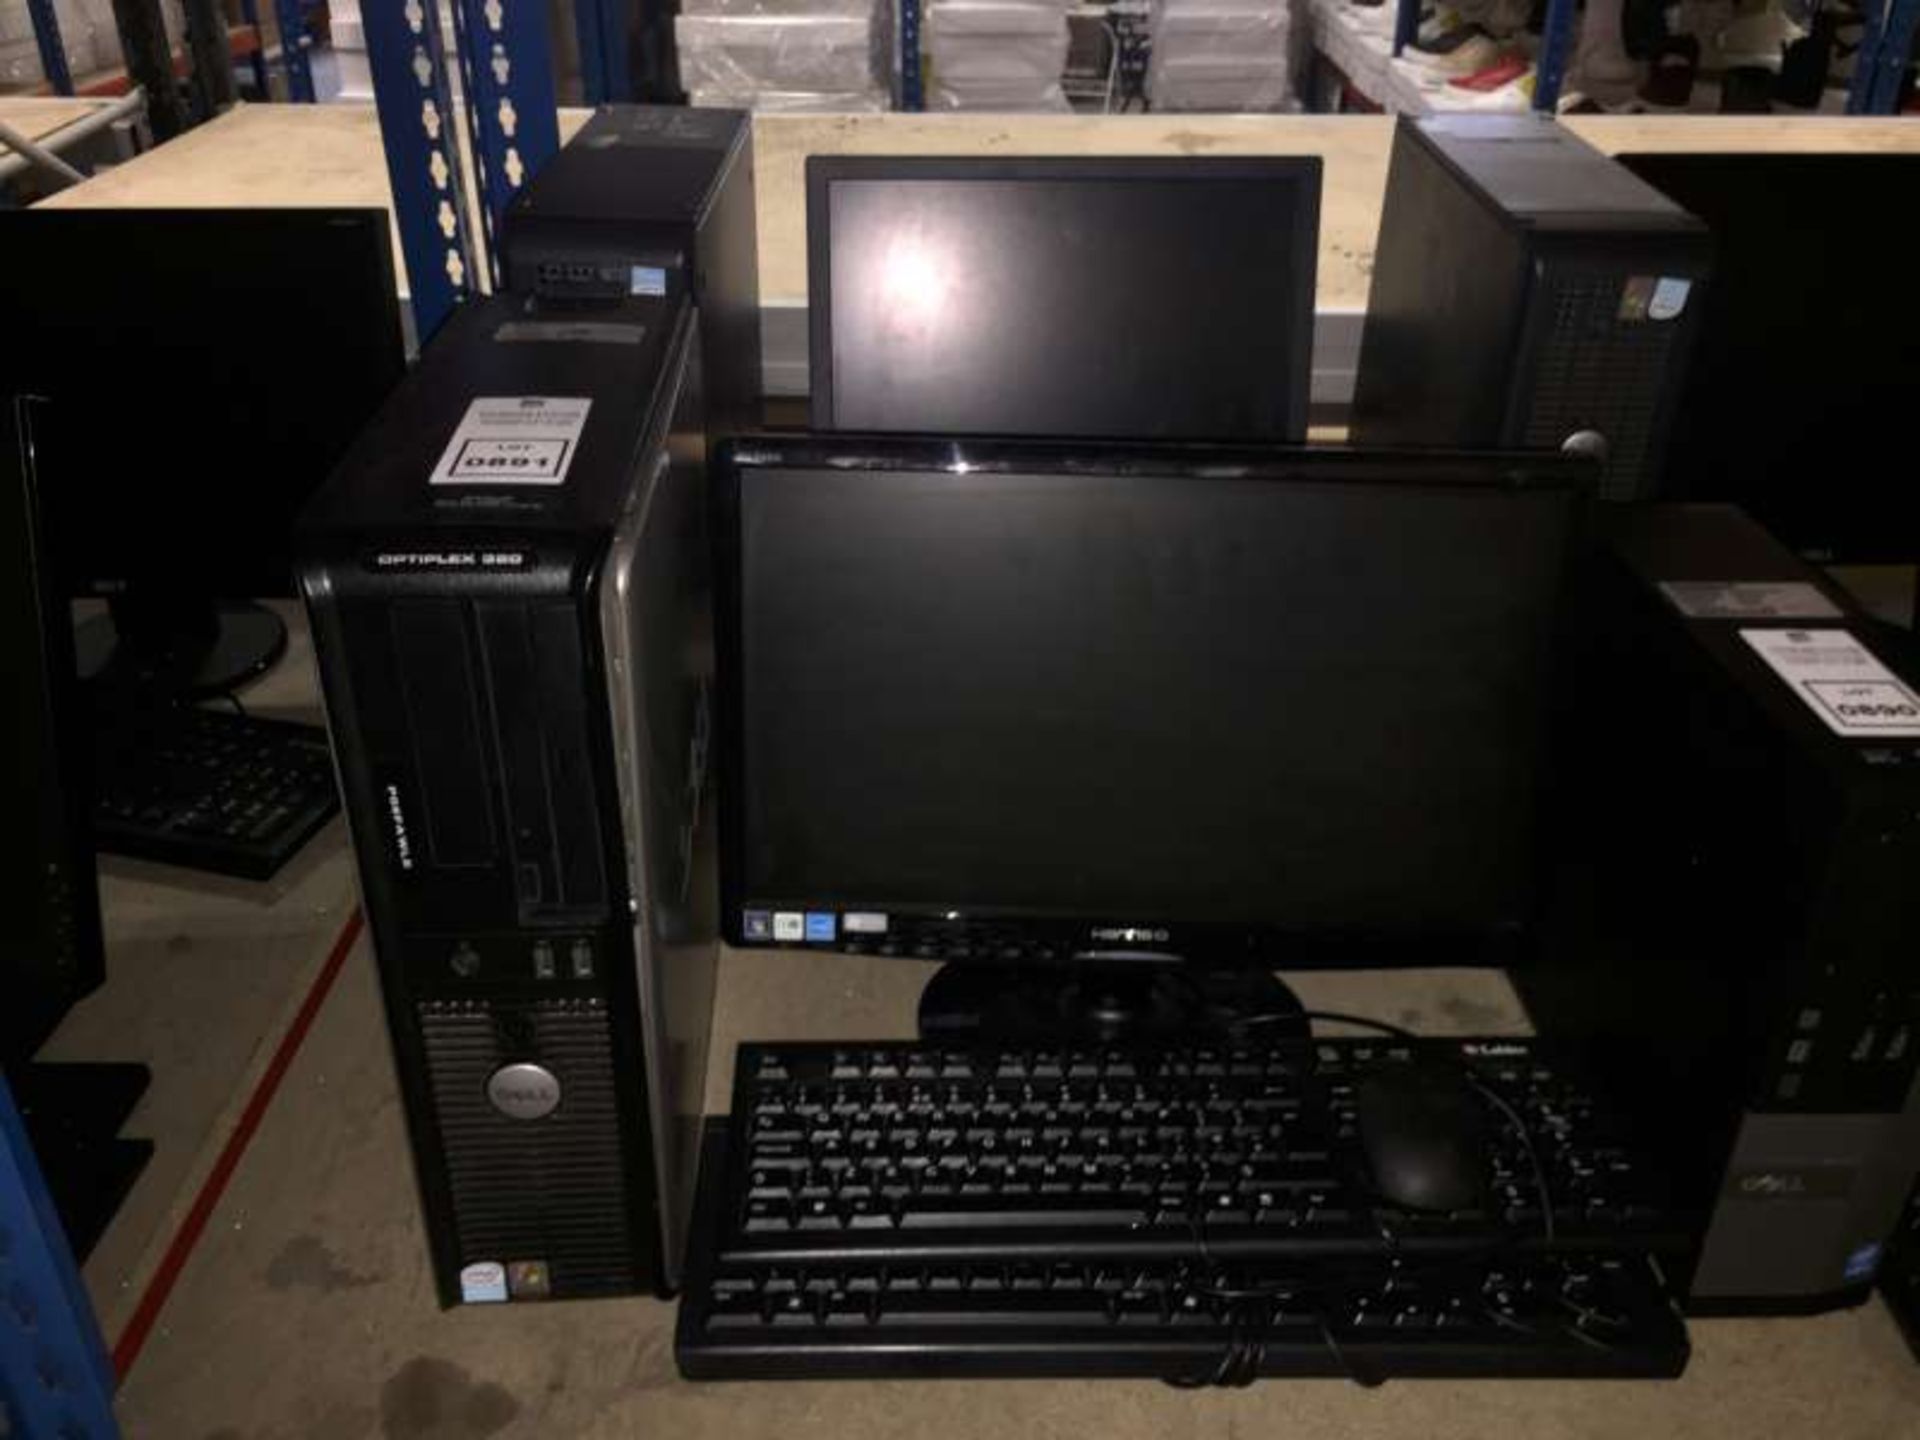 2 X DELL PC BASE UNITS WITH DELL / HANNS - G FLATSCREEN MONITORS, 3 X COMPUTER KEYBOARDS, 1 X